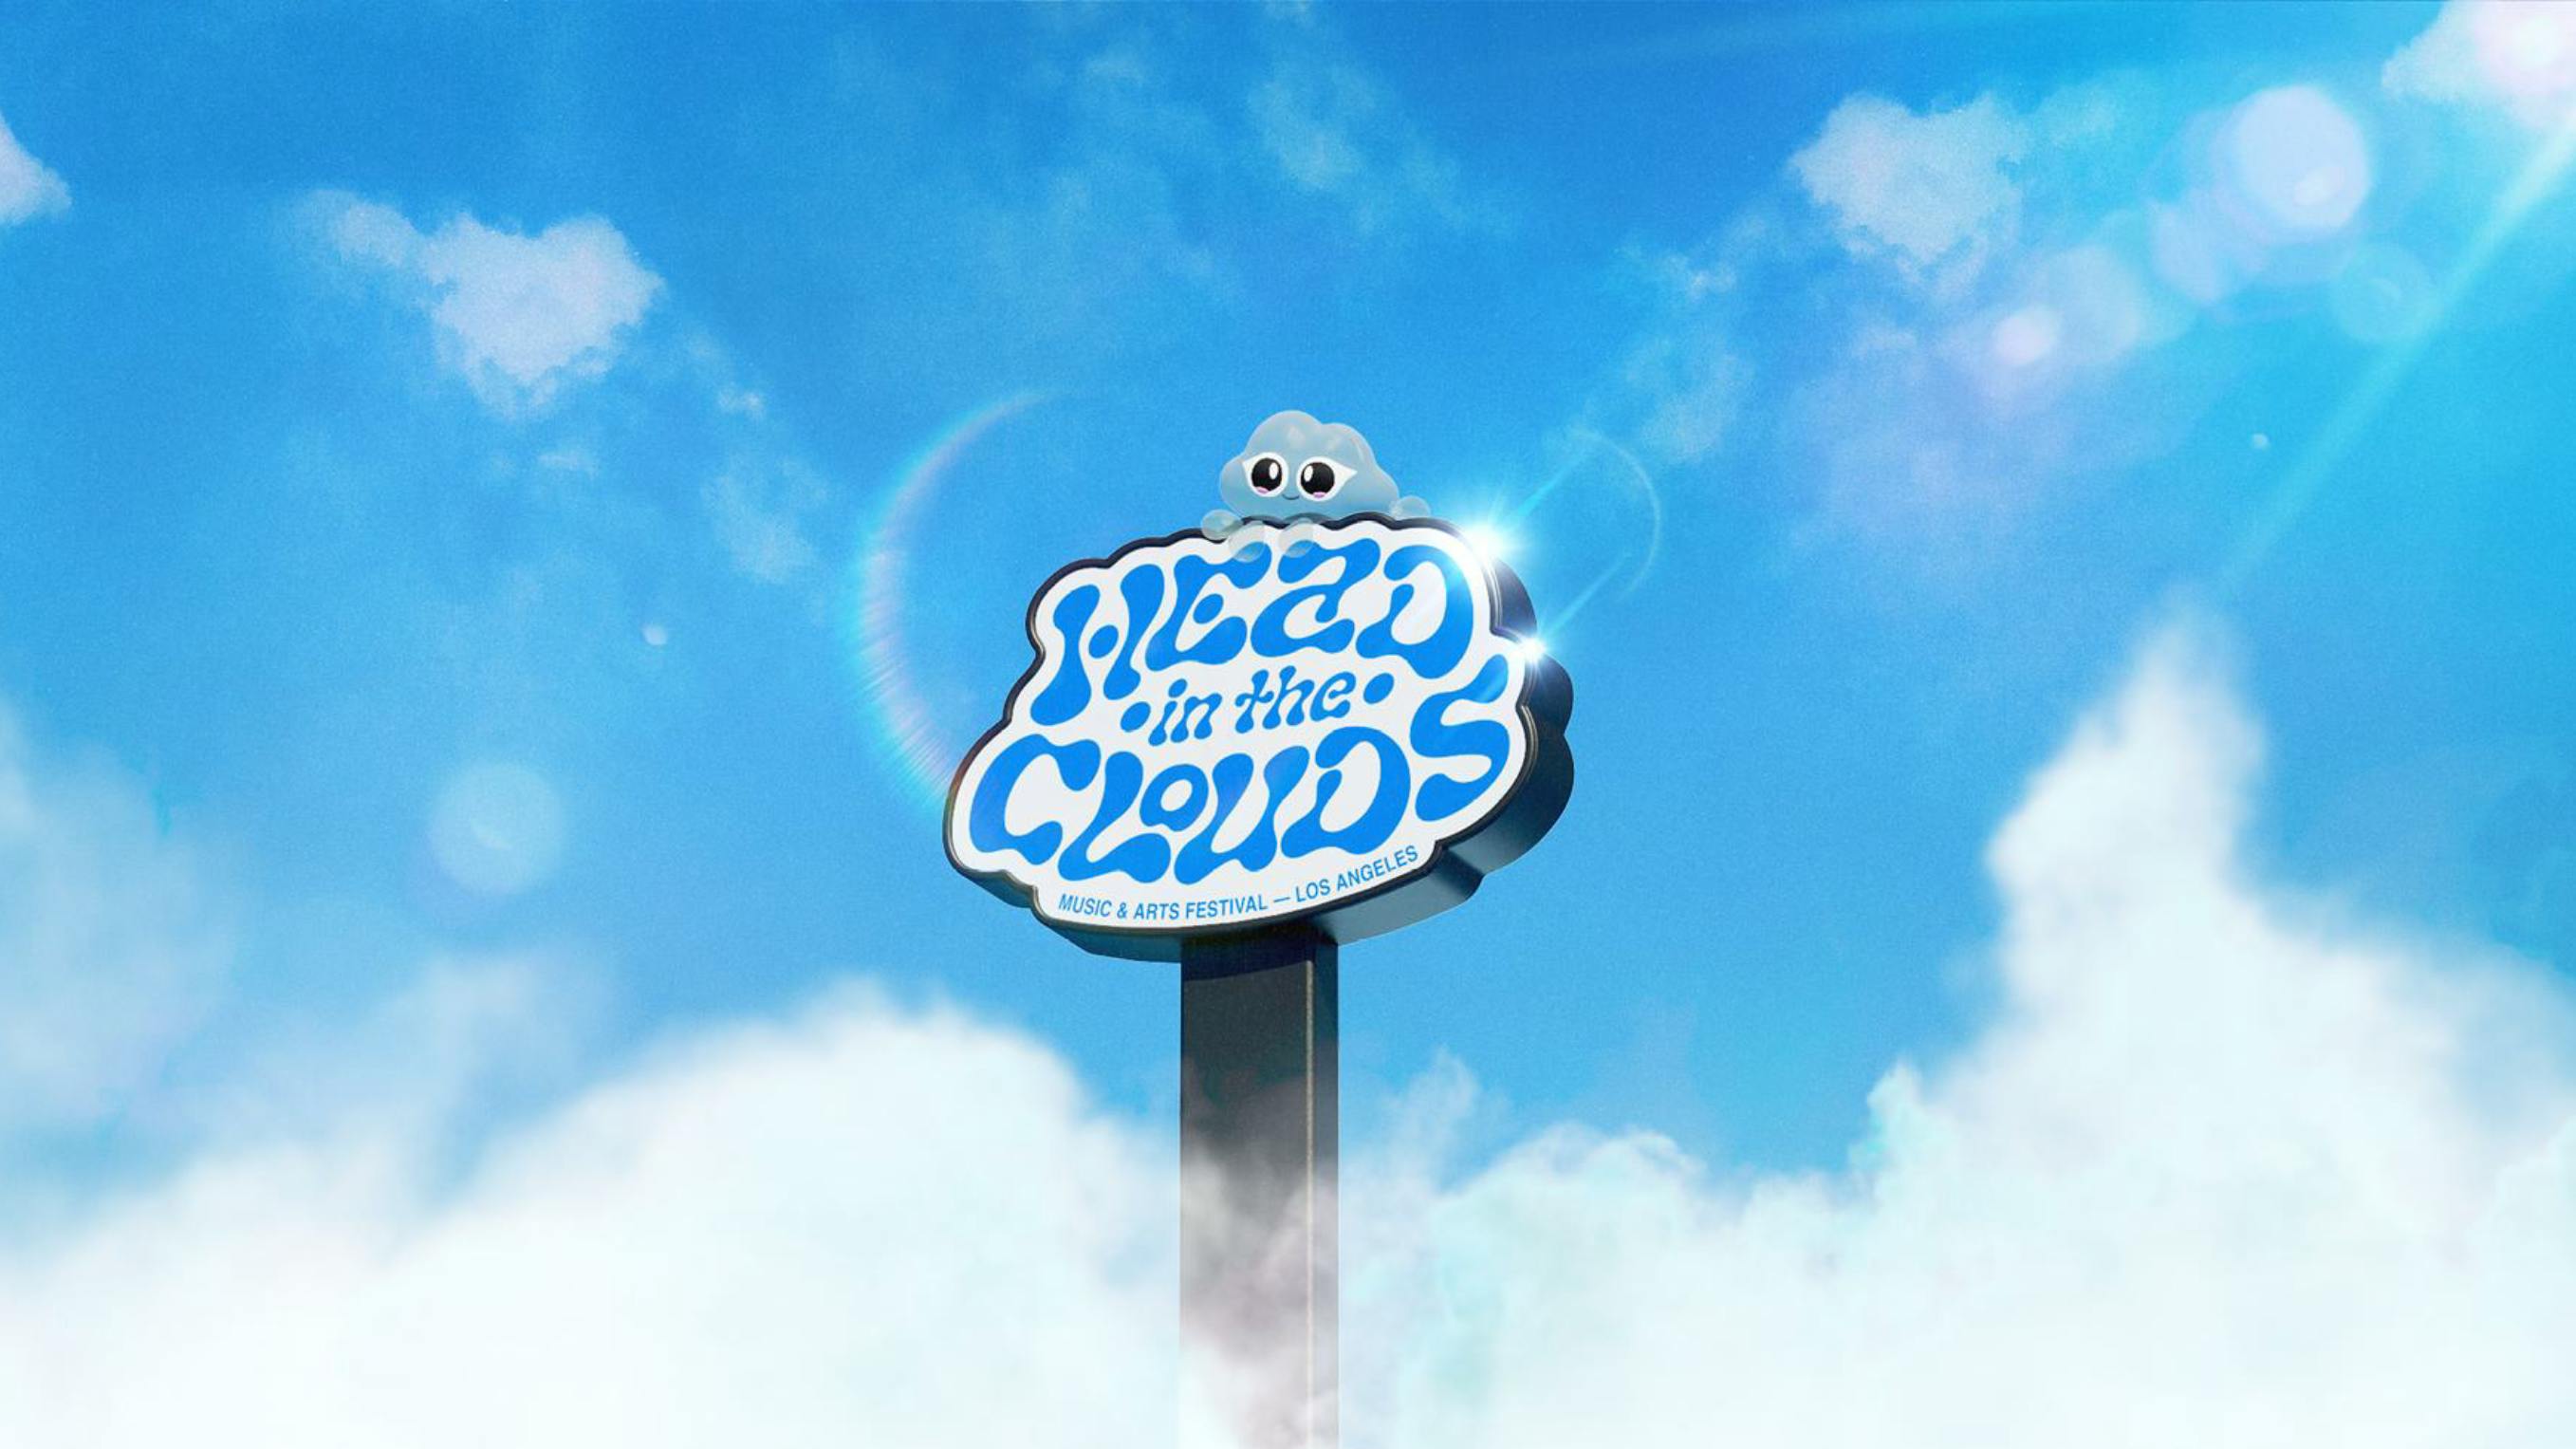 A whimsical promotional image for the Head In The Clouds Music & Arts Festival in Los Angeles, showcasing a clear blue sky with fluffy white clouds. At the center is a stylized sign resembling a cloud, with the text 'Head in the Clouds' in a playful, bold blue font. On top of the cloud sign sits the festival's mascot, Clo The Cloud God, a cute animated cloud character with wide eyes. Sunlight flares gently into the frame, creating a dreamy and inviting atmosphere that captures the essence of the festival's name and theme.